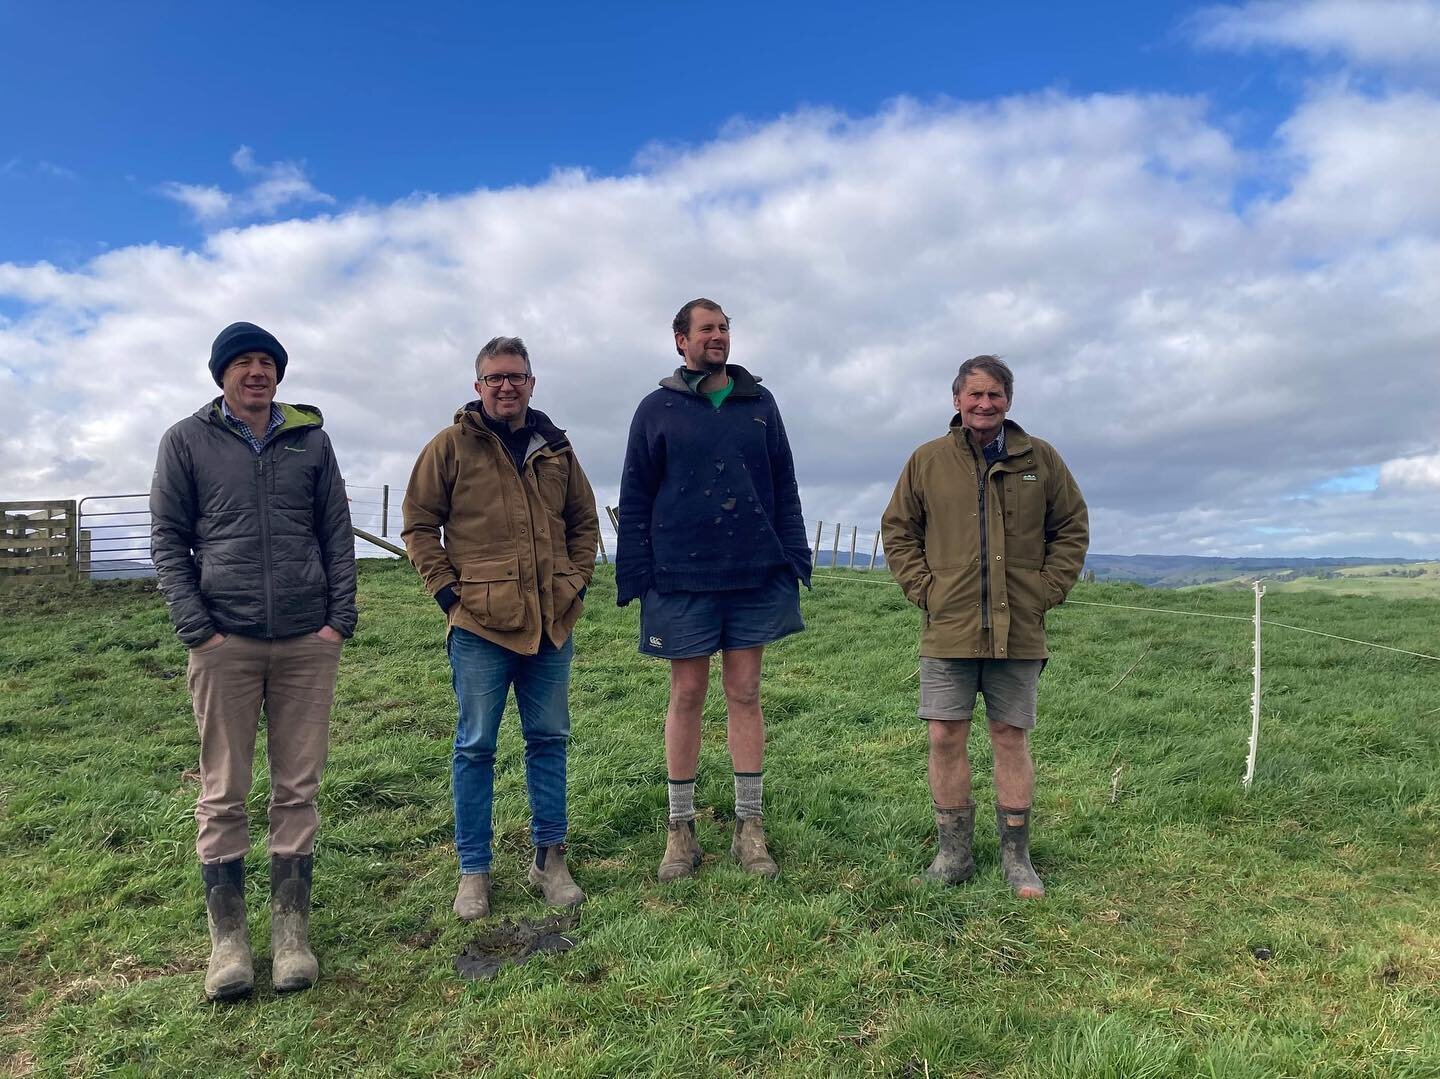 Northview - a good look around the farm. Ready for Spring and some grass growth. A bit of activity at the back woolshed.

#plimmerandcofarms #northview#motukawa #blackhill #kellys  #nzfarming #farming #newzealand #spring